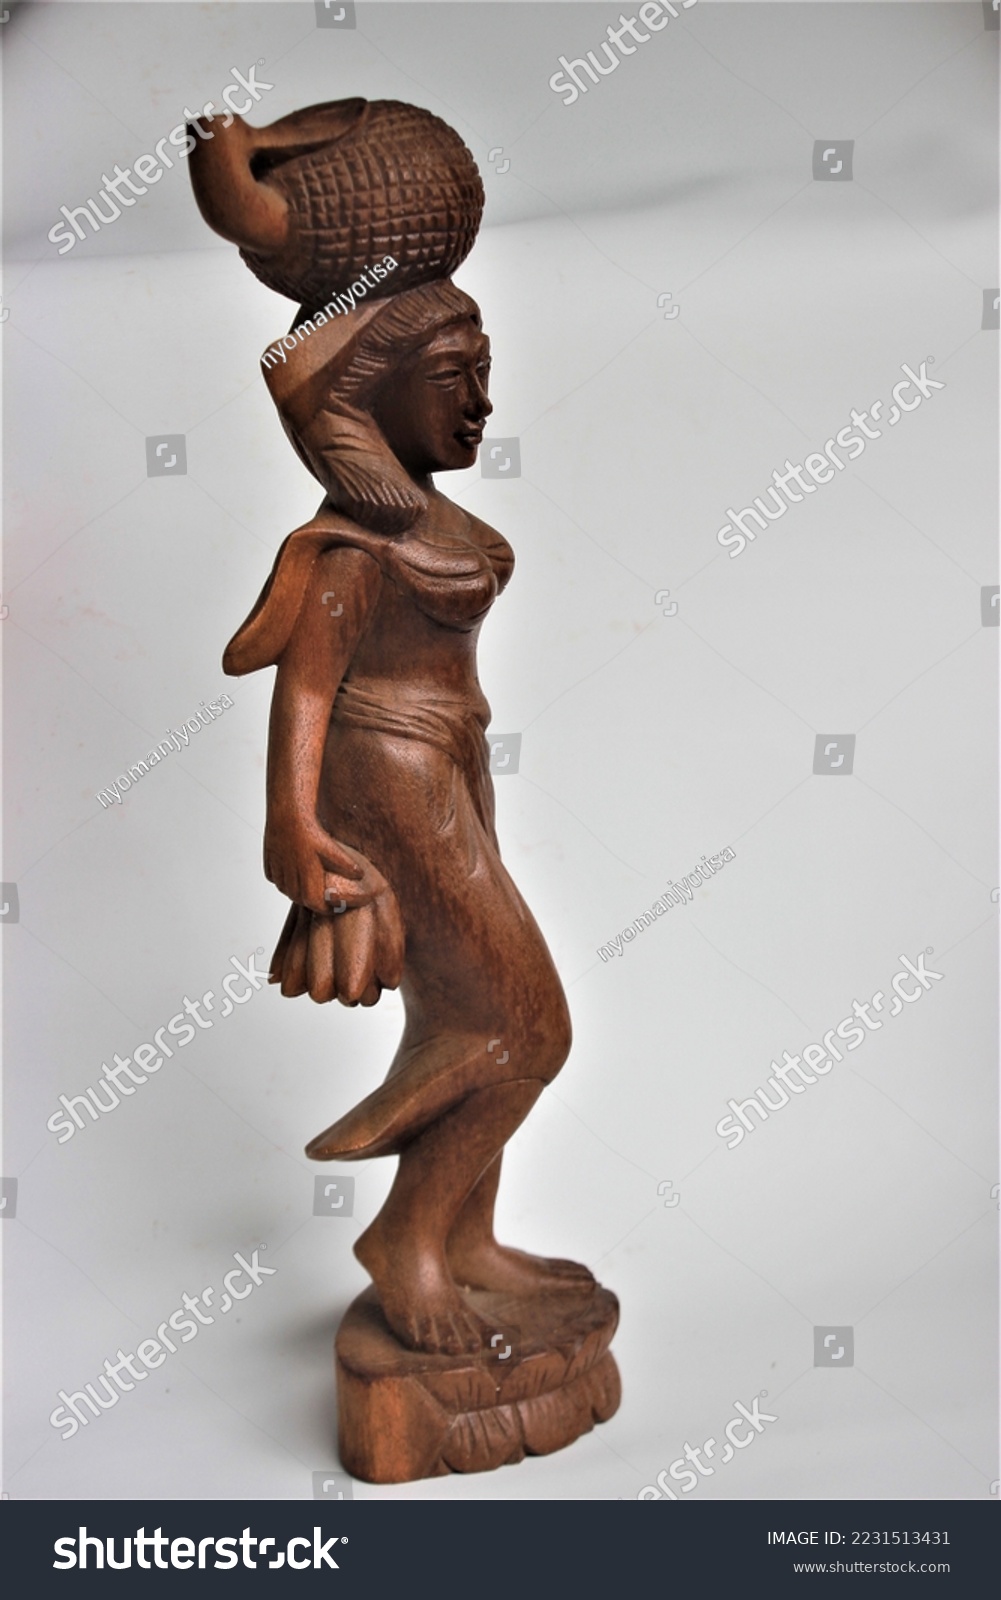 Balinese Girl Wood Carving, Wooden Statue, Wood Sculpture, Hand Made, Art from Bali Indonesia #2231513431